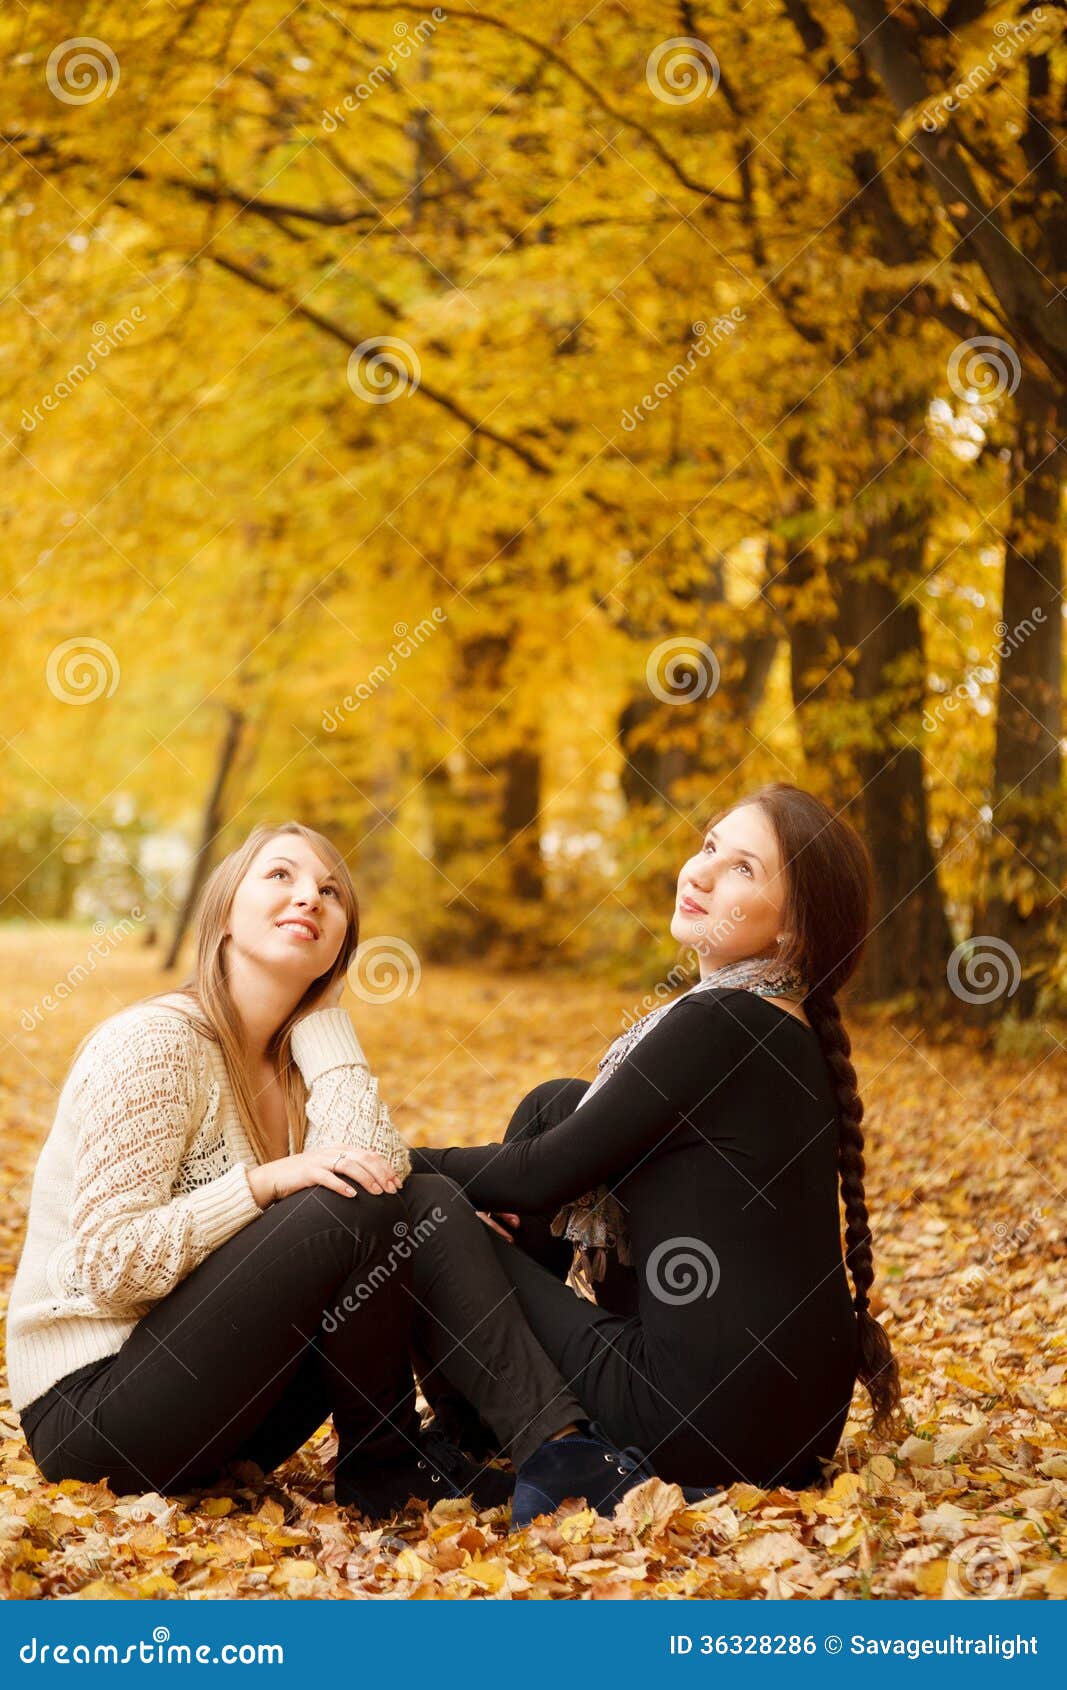 Two young females outdoors stock photo. Image of girlfriends - 36328286